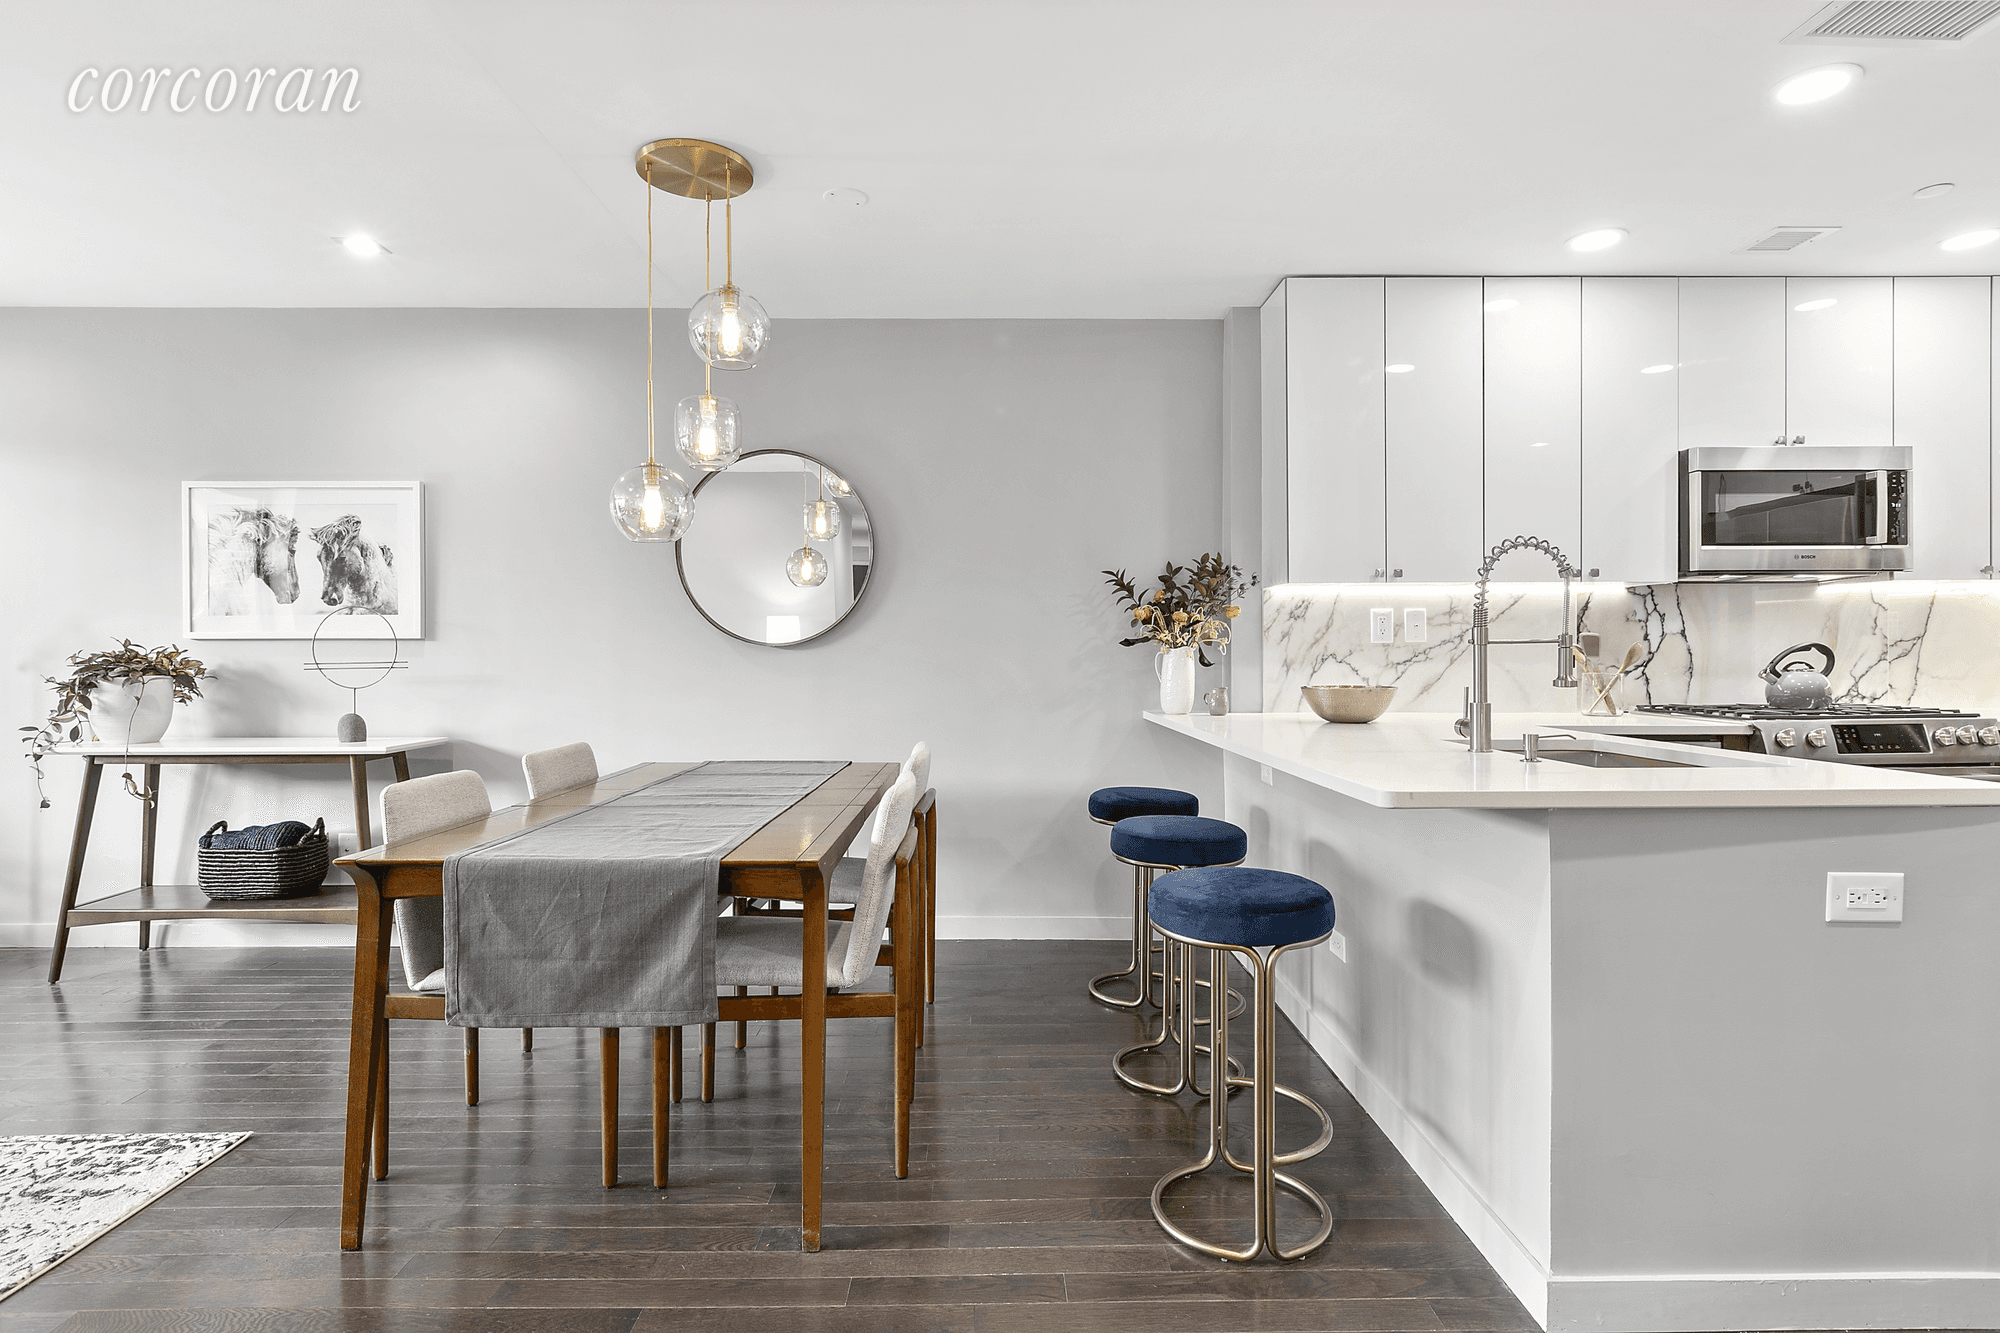 Introducing 336 St. Marks Avenue, The Newest Boutique Condominium in Bustling Prospect Heights Brooklyn.